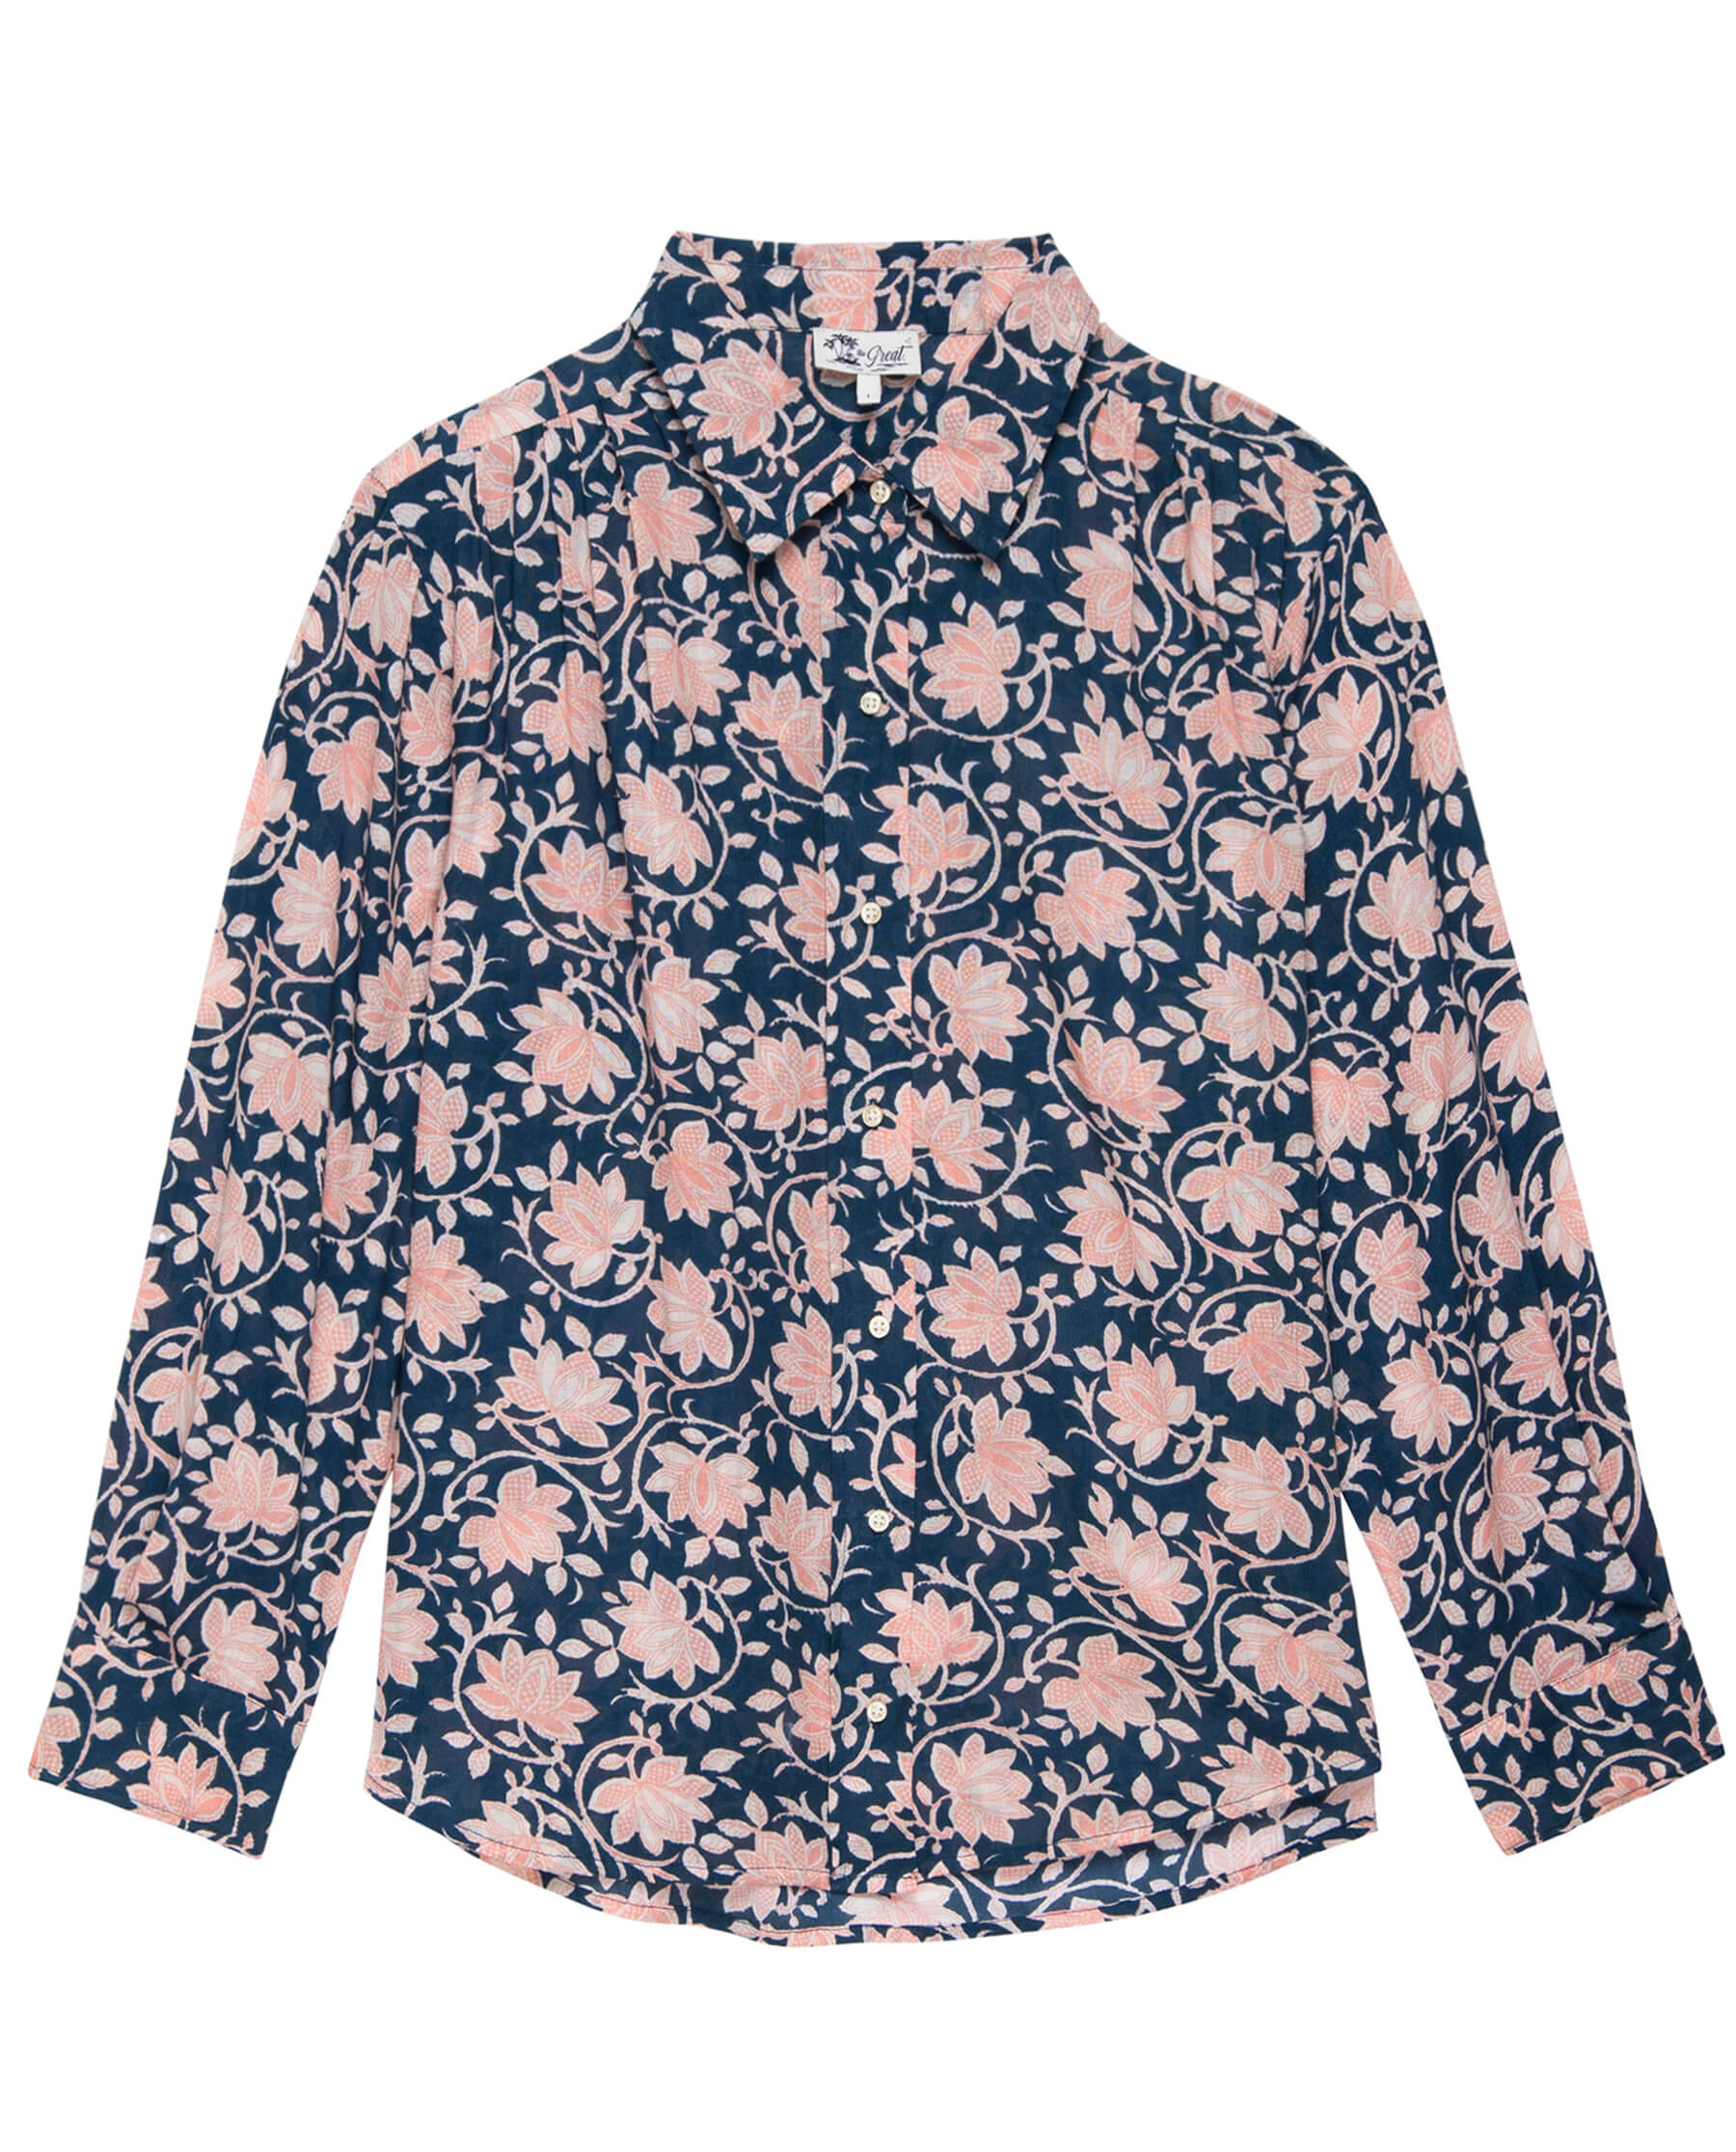 The Cove Shirt. -- Bay Oasis Floral COVER-UP SHIRTS THE GREAT. SP24 SWIM